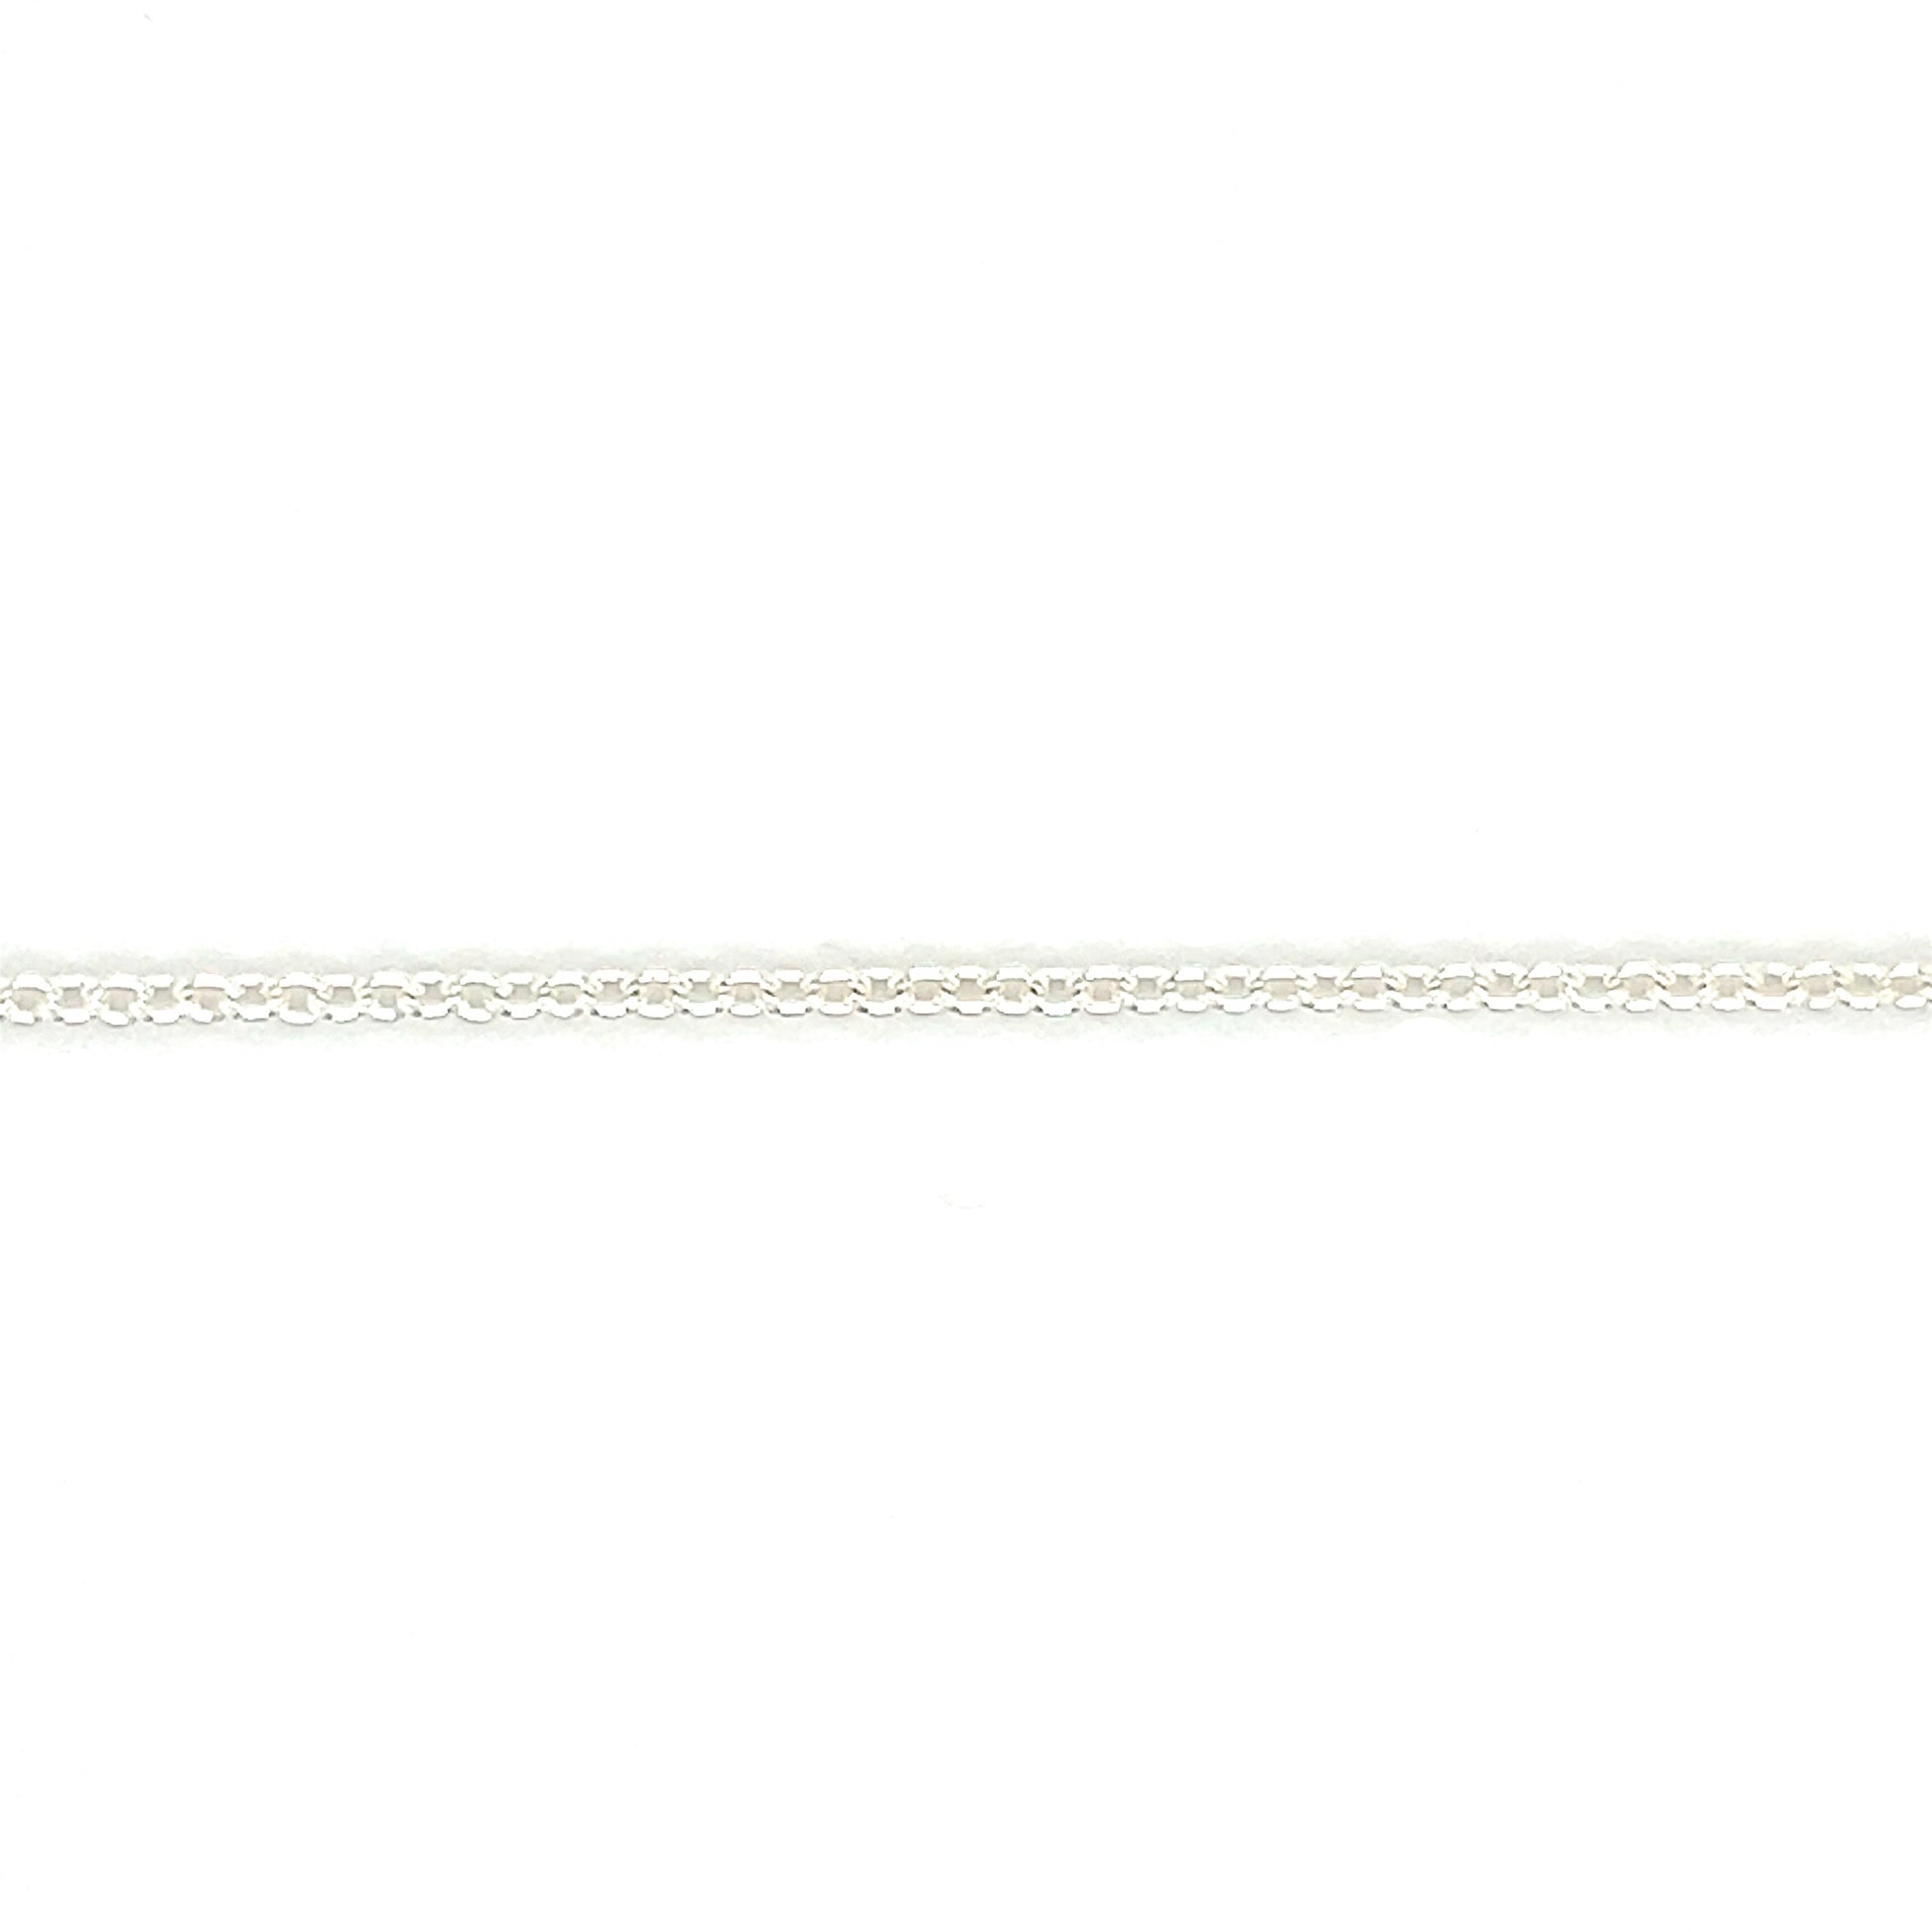 Cable Chain 1.5mm with Twenty Inches of Length in Sterling Silver Chain View